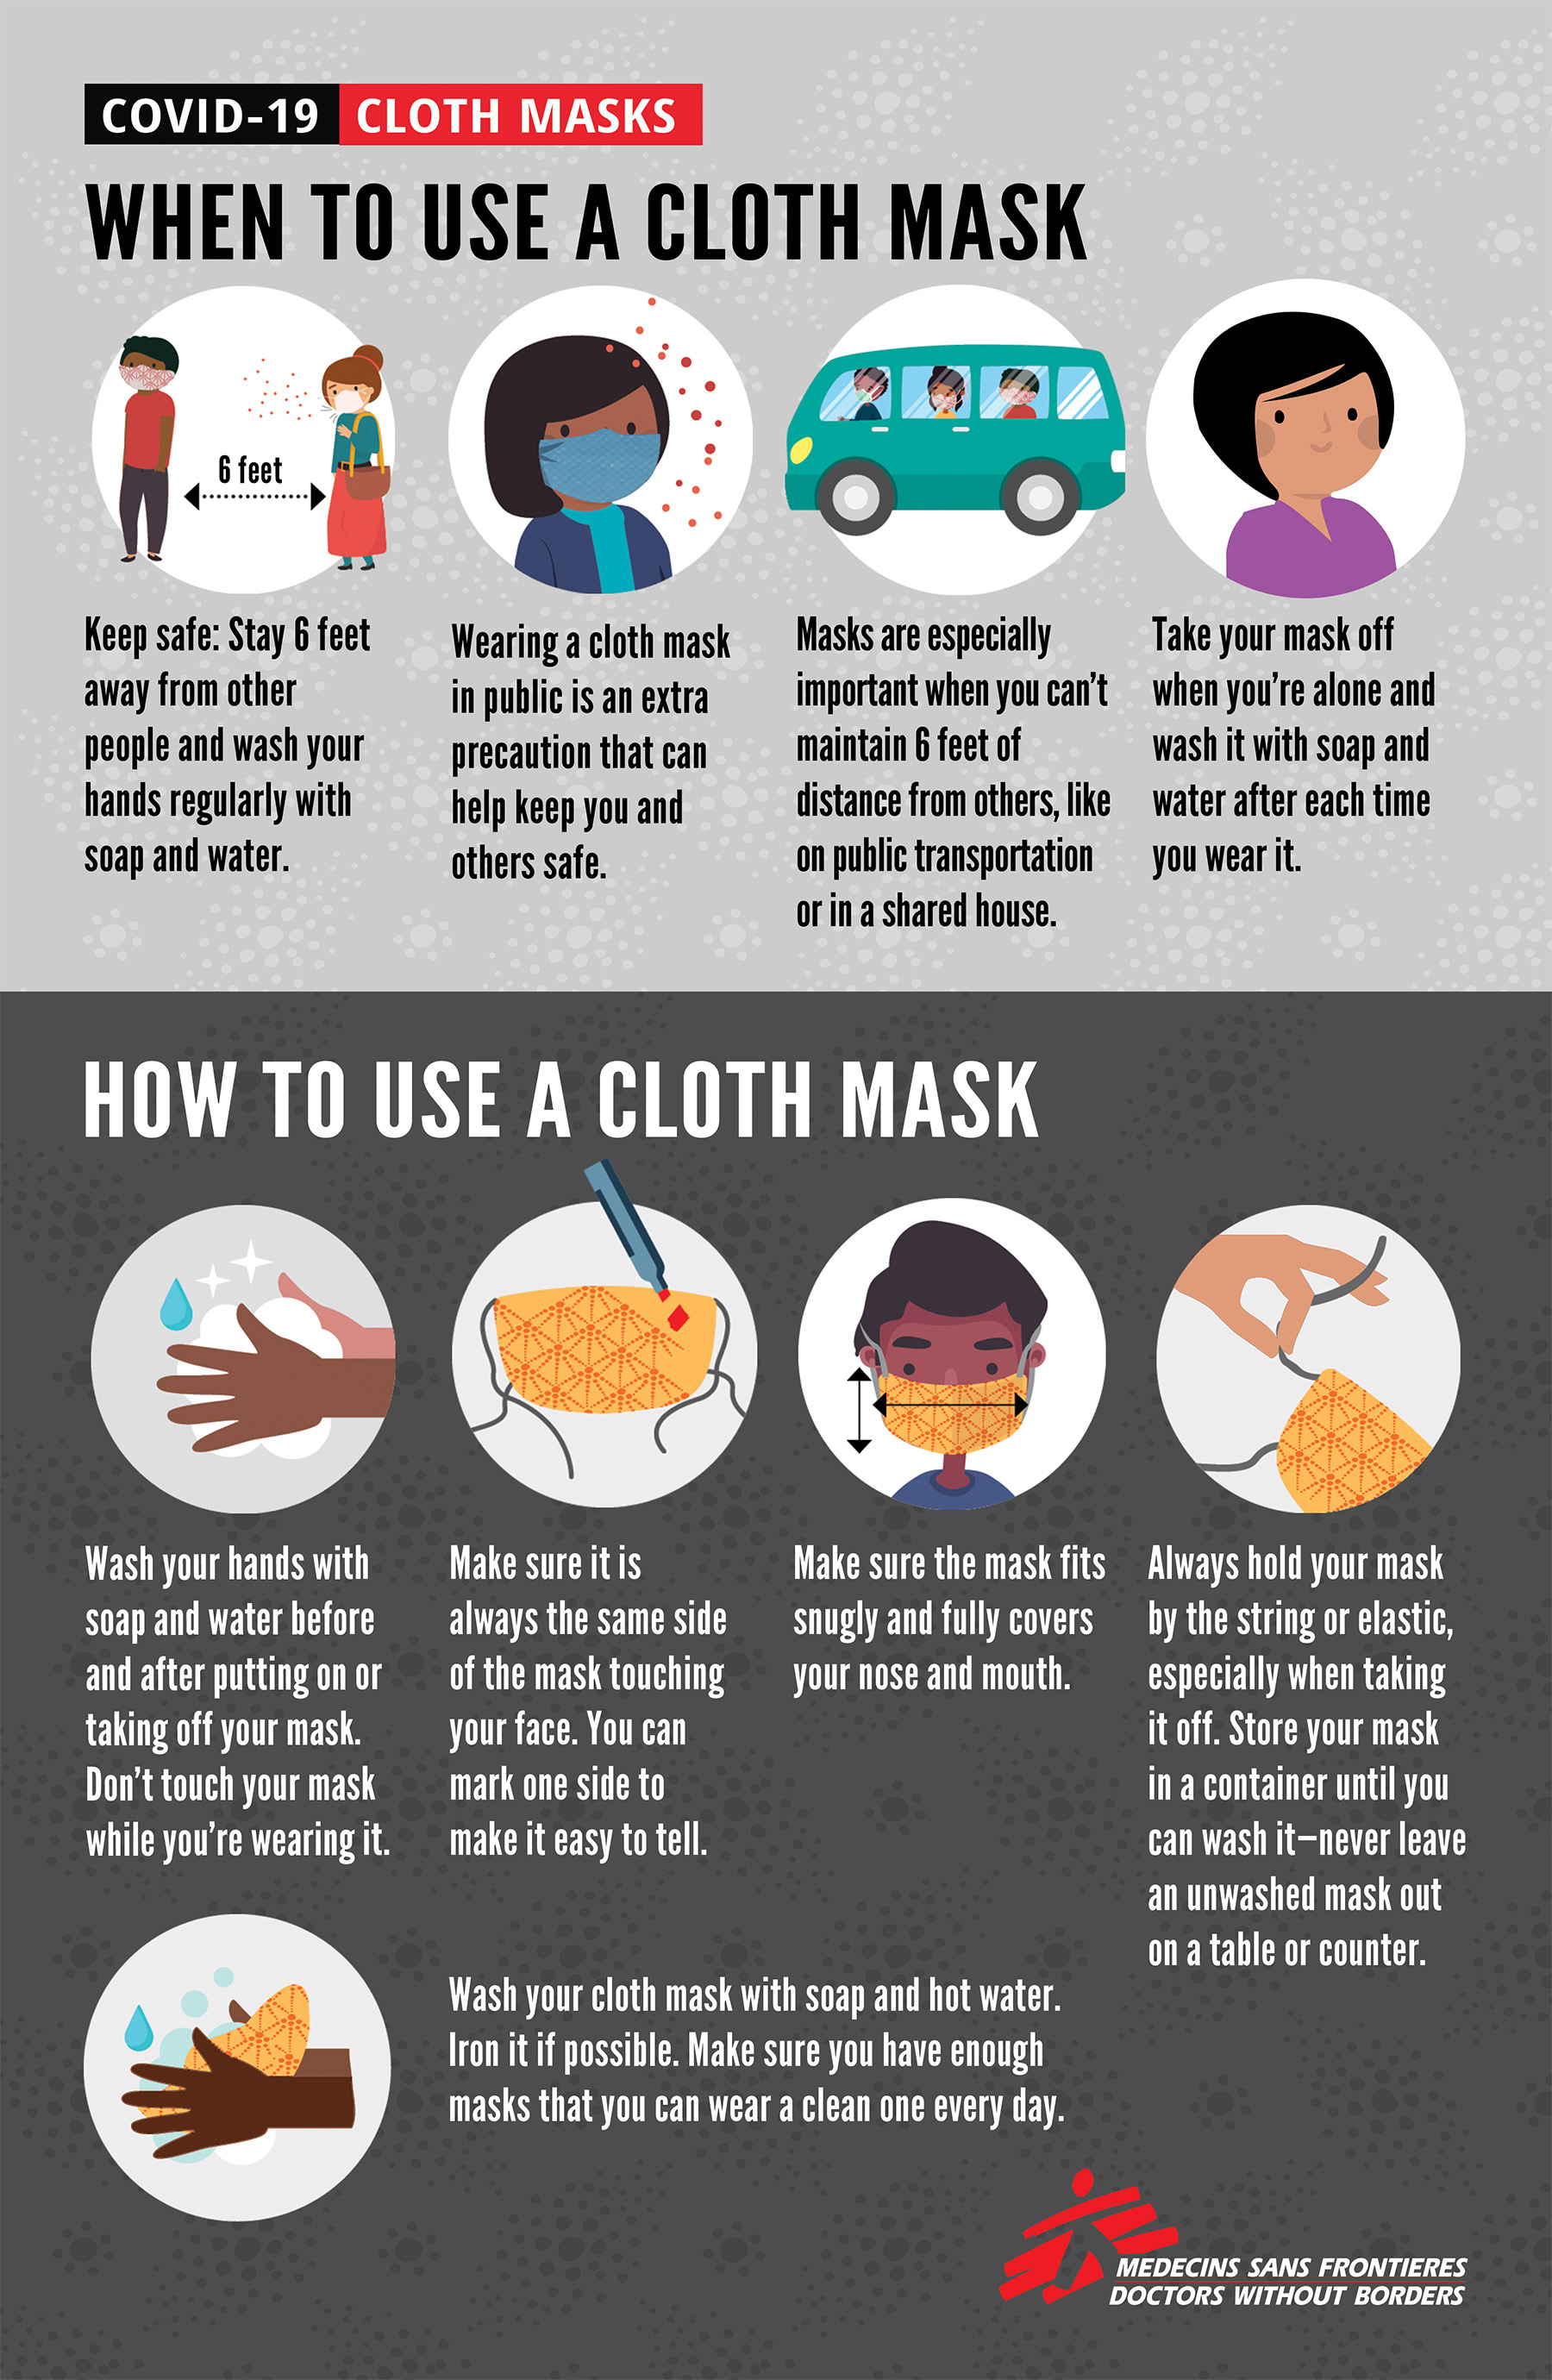 When to use a cloth mask COVID-19